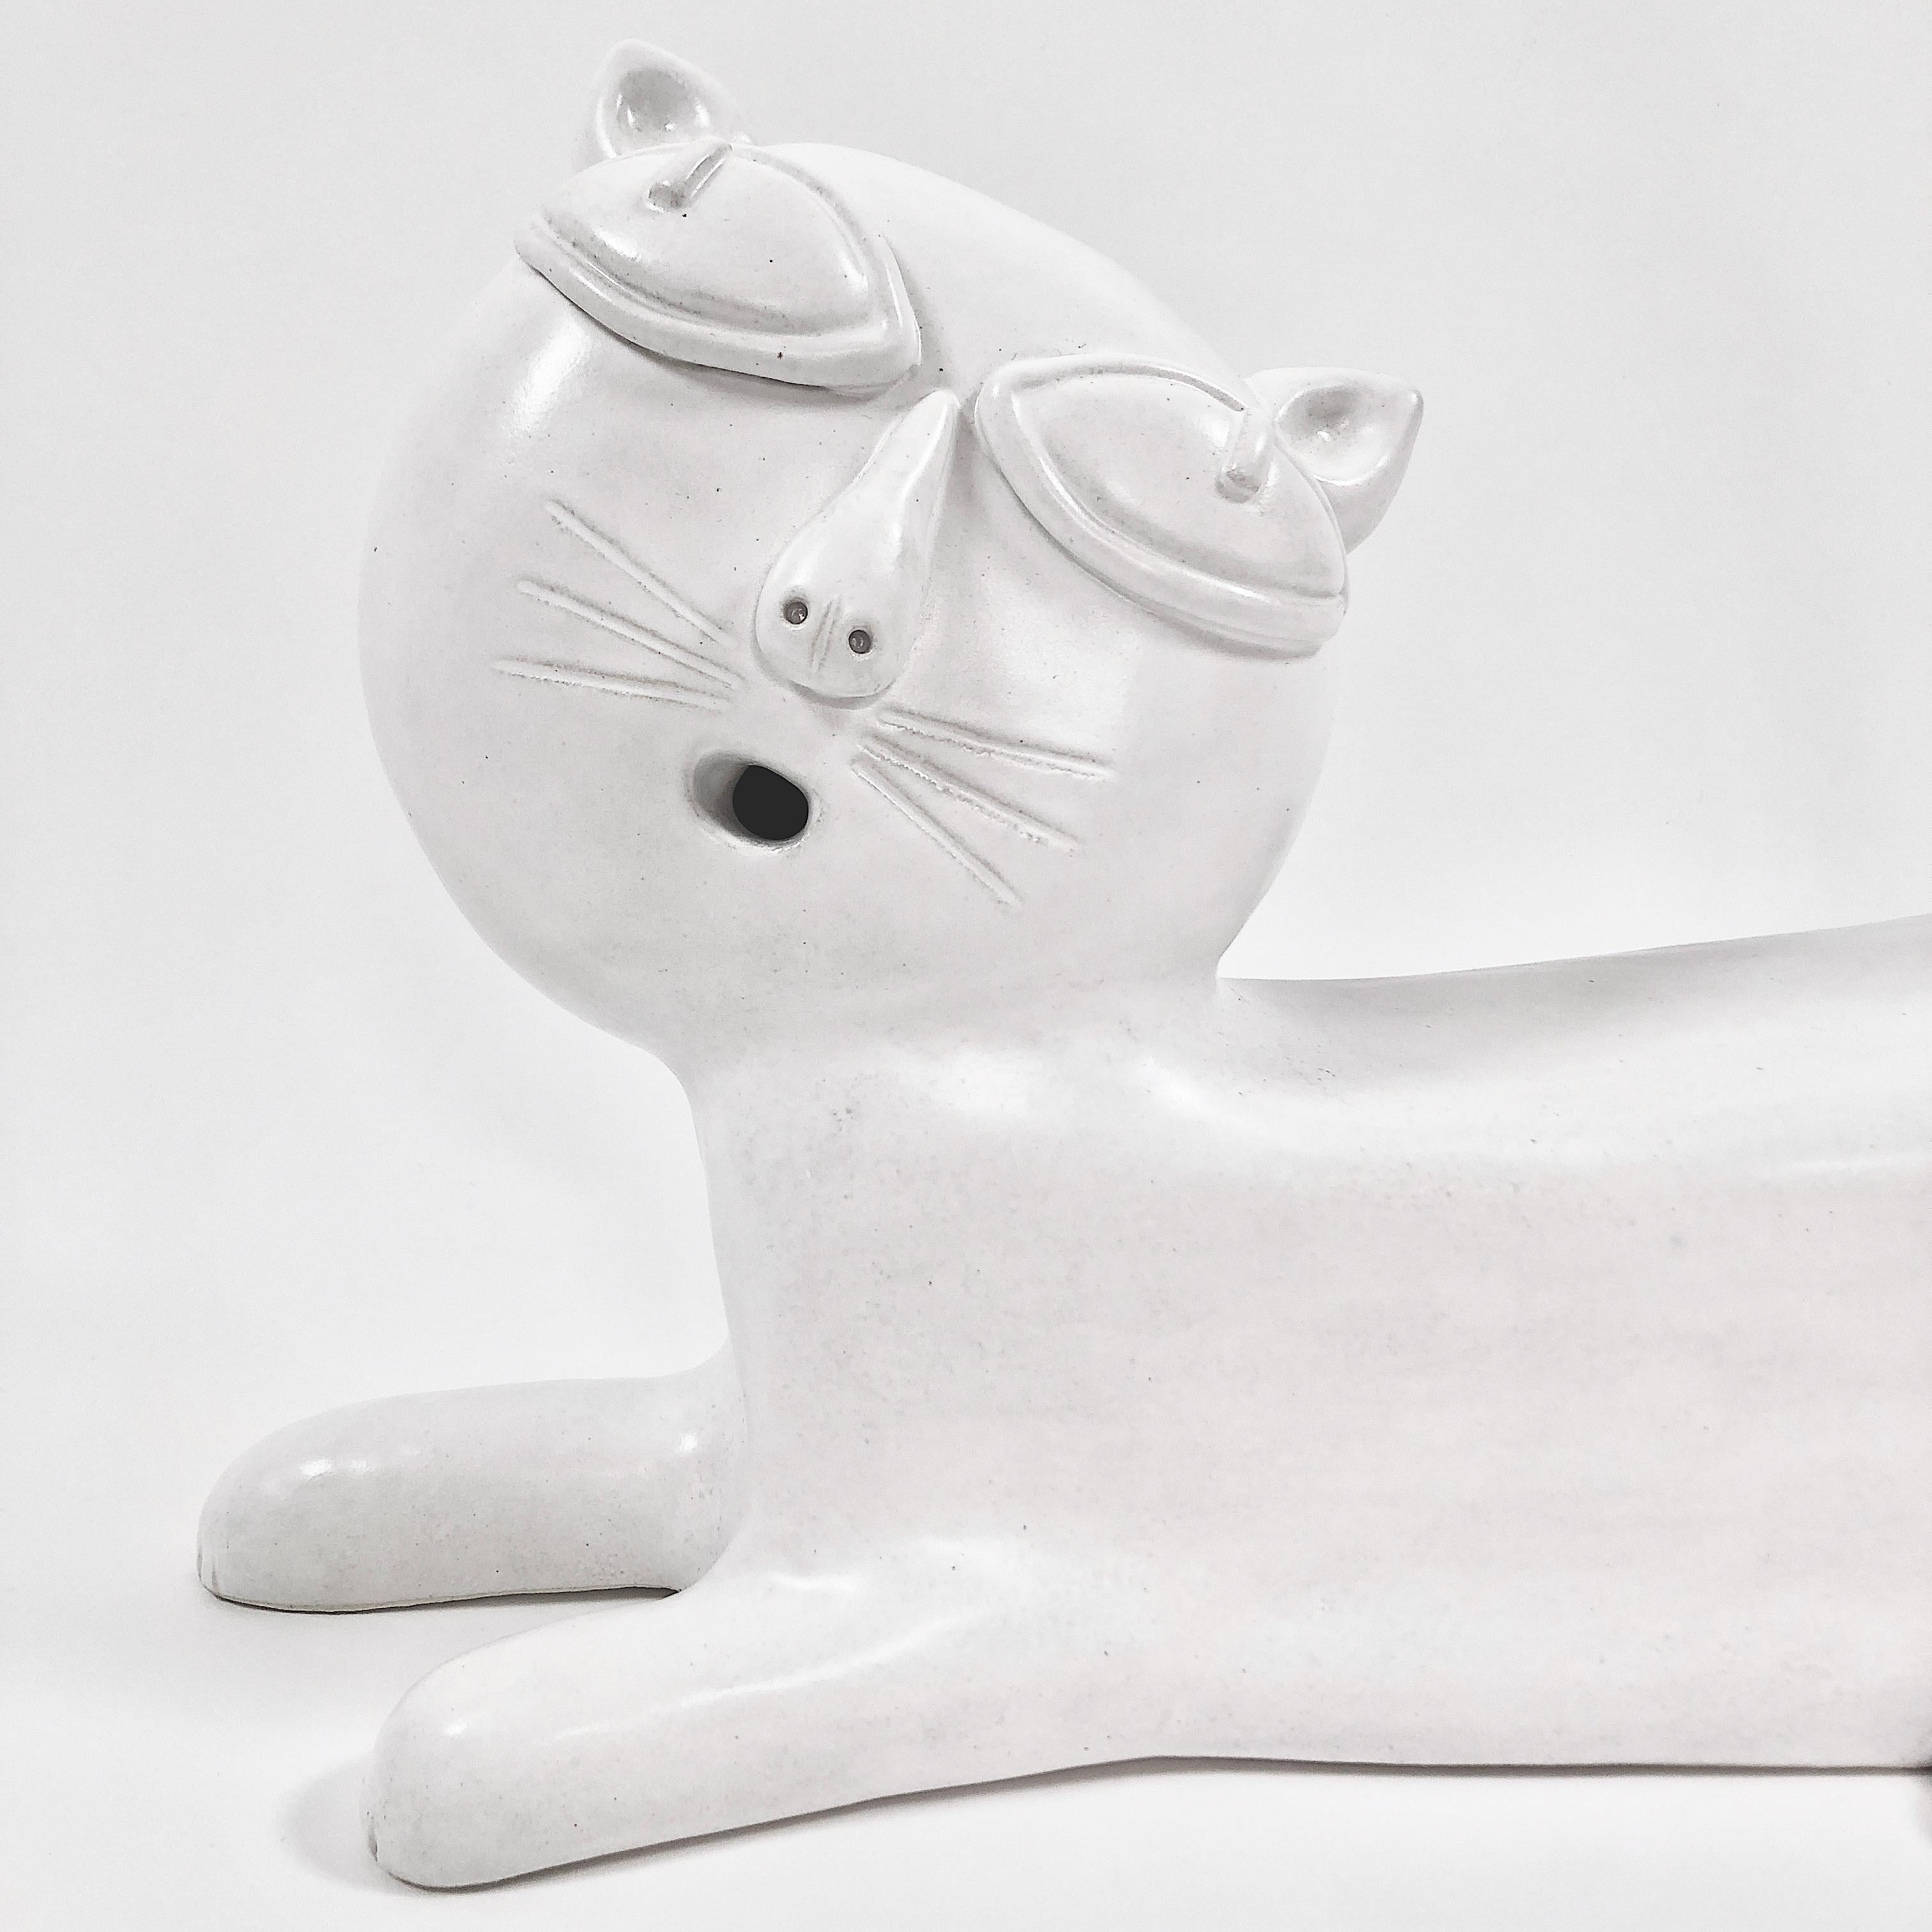 Large ceramic sculpture forming a table lamp base in shape of a stylized cat, ceramic glazed in matte milky white.
One of a kind handcrafted piece signed and numerated by the French ceramicists, Dalo. 

The height measurement concerns the ceramic